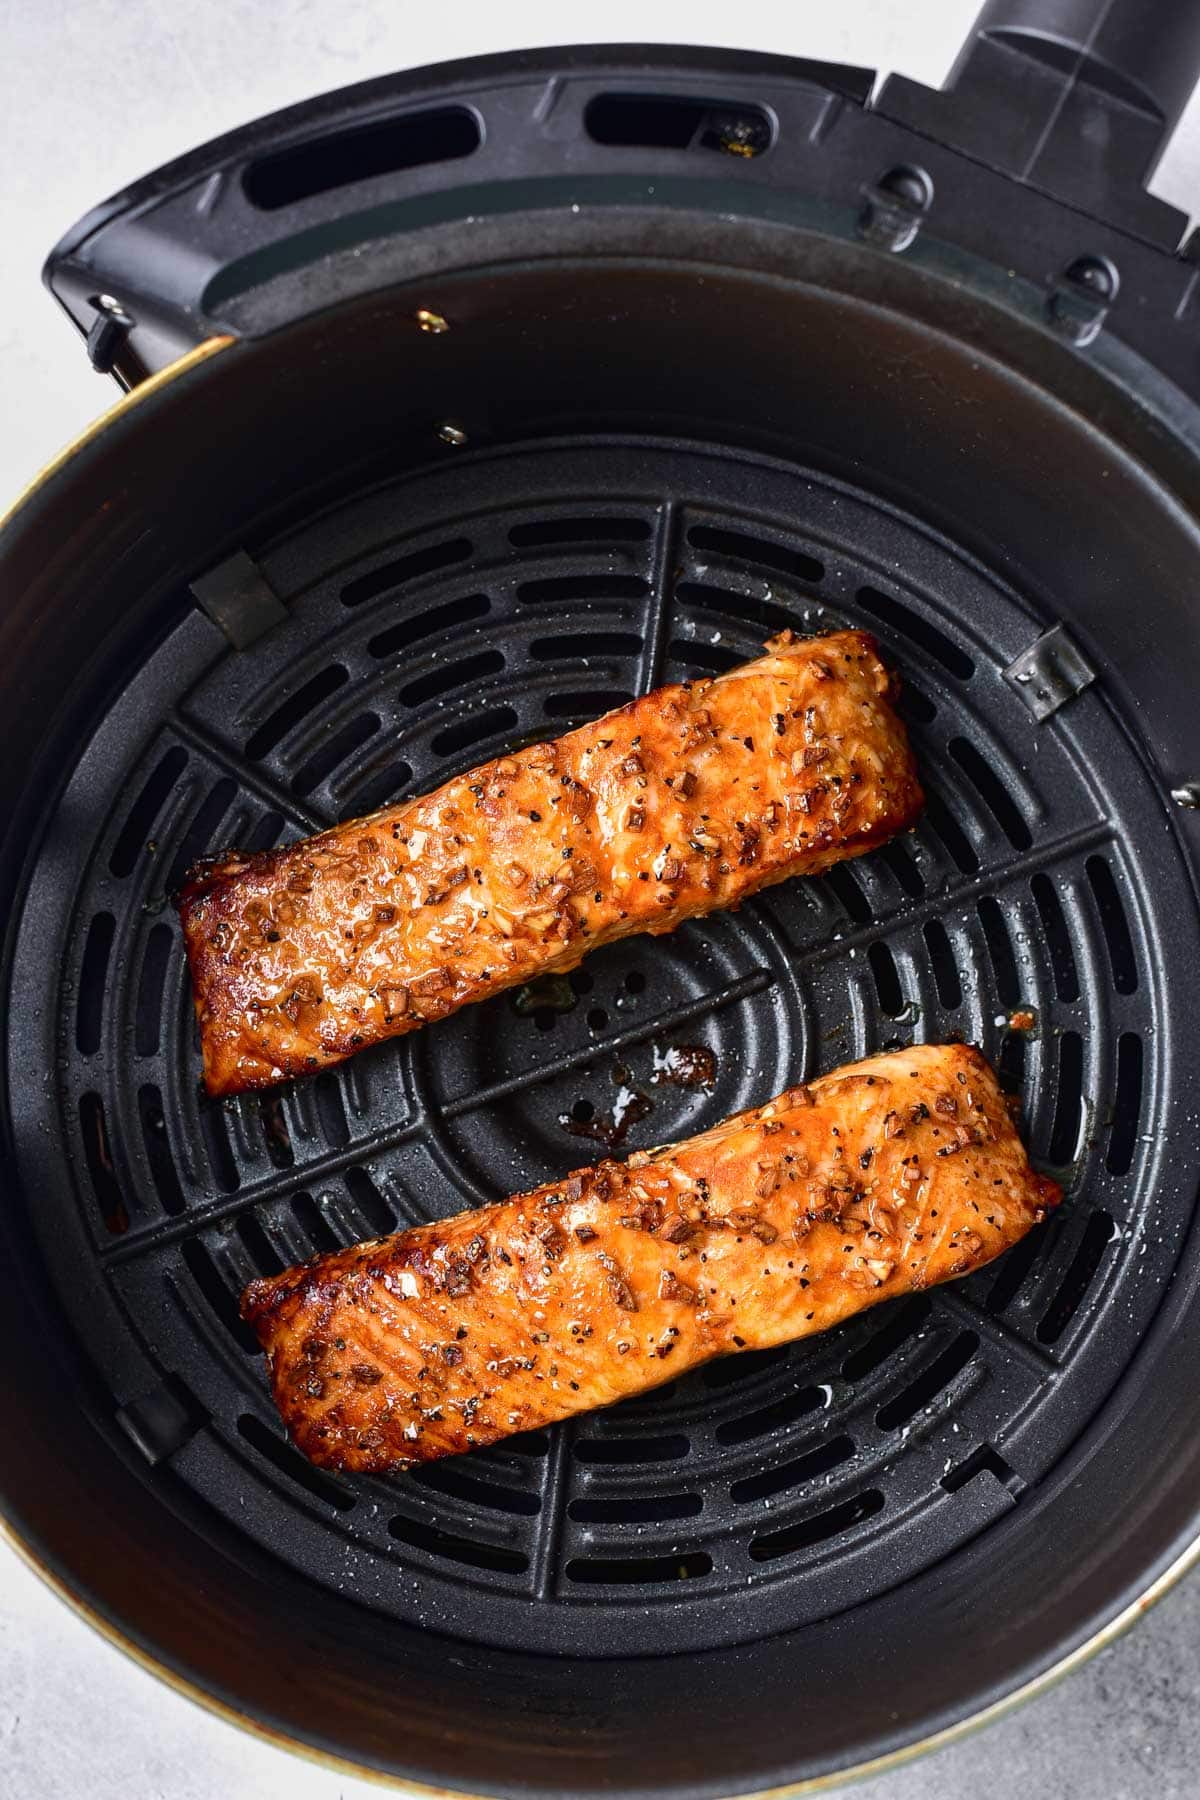 two cooked fillets of salmon in round black air fryer basket.